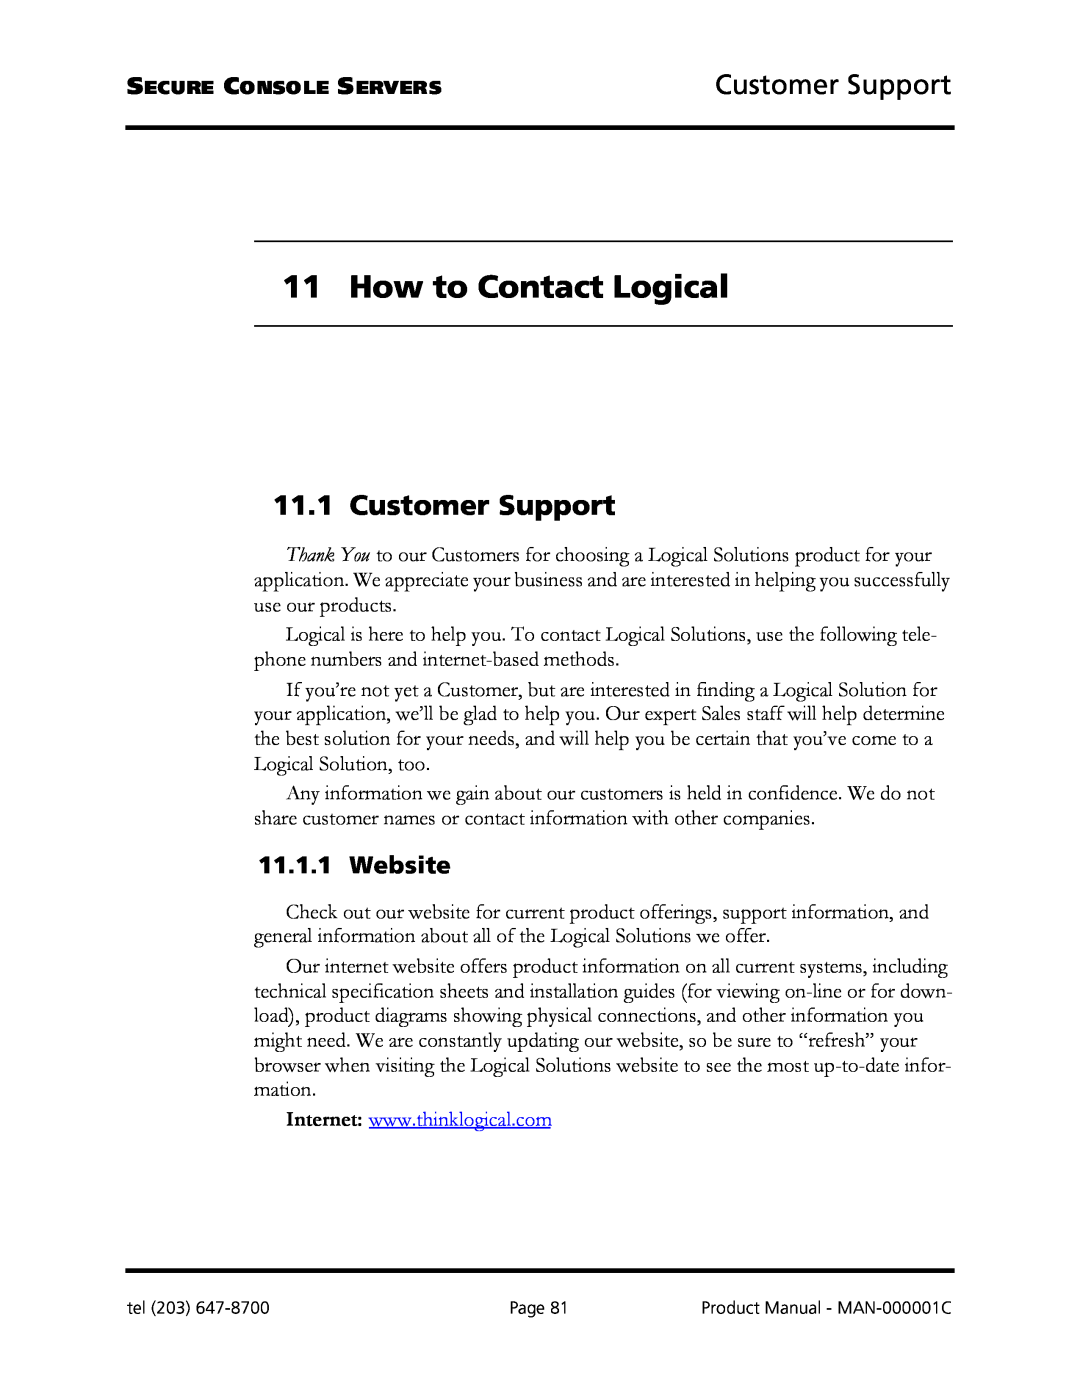 Logical Solutions SCS-R manual How to Contact Logical, Customer Support, Website 